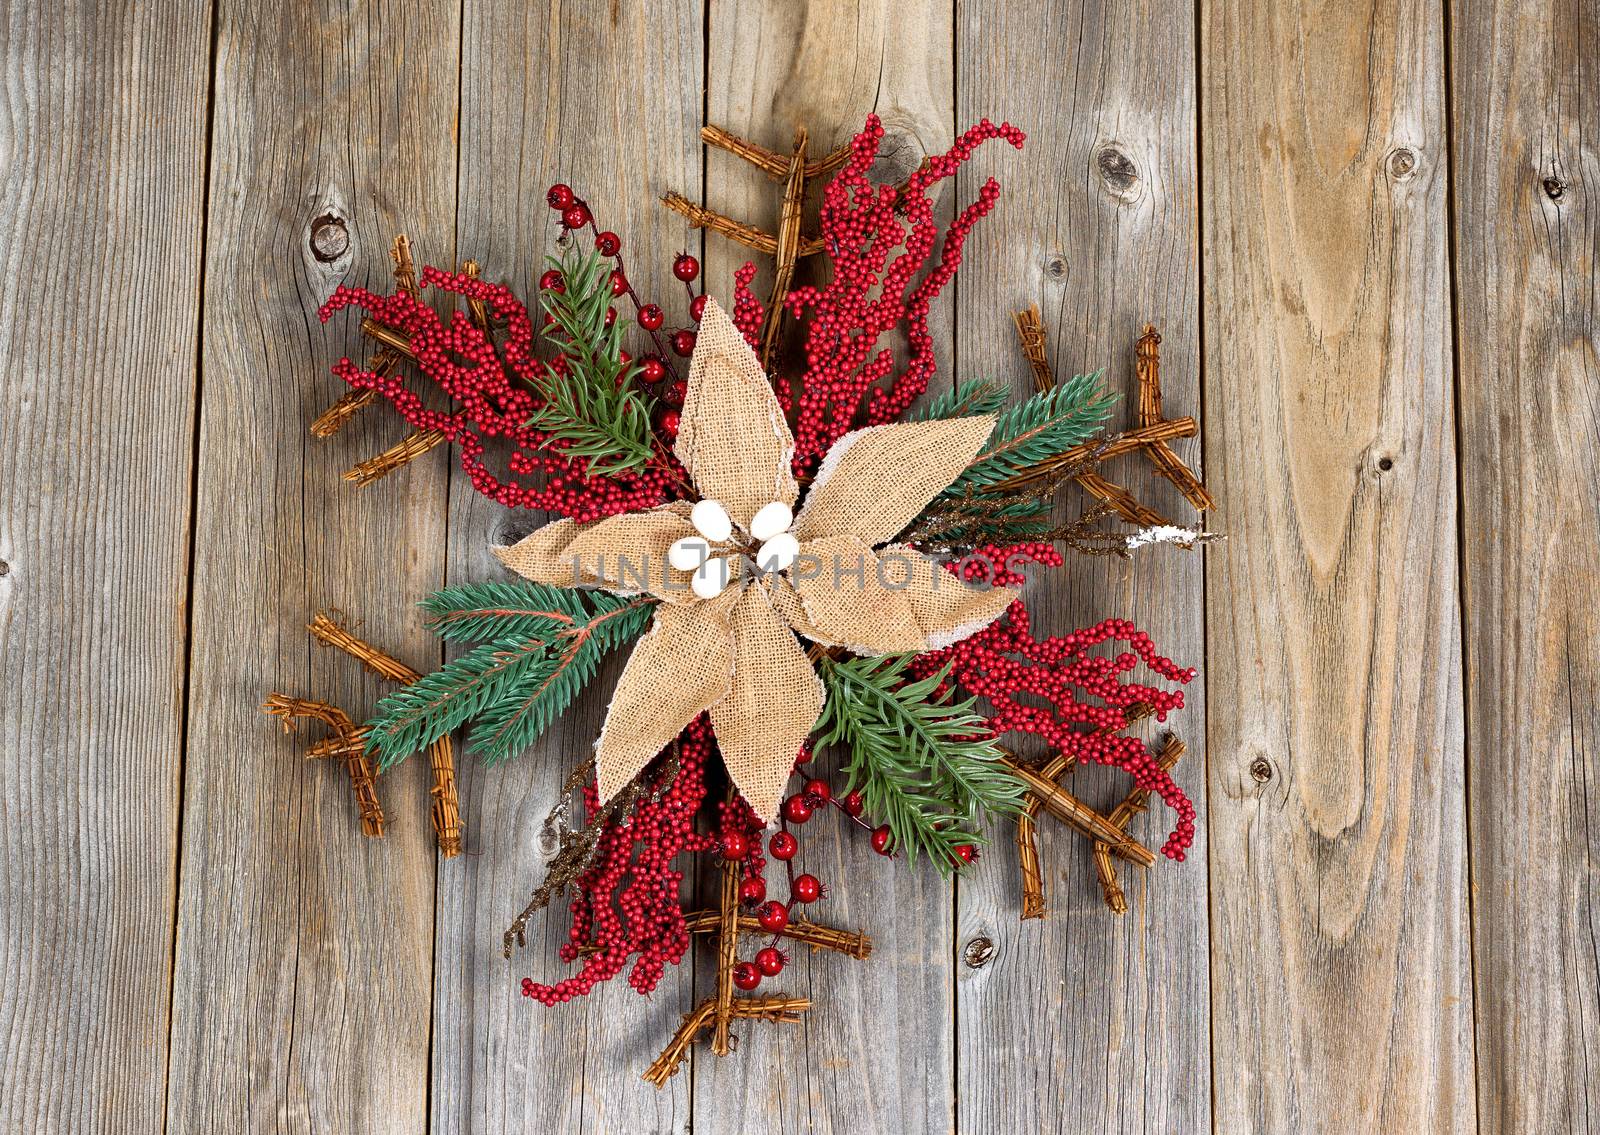 Christmas wreath with cloth flower on rustic wooden boards by tab1962